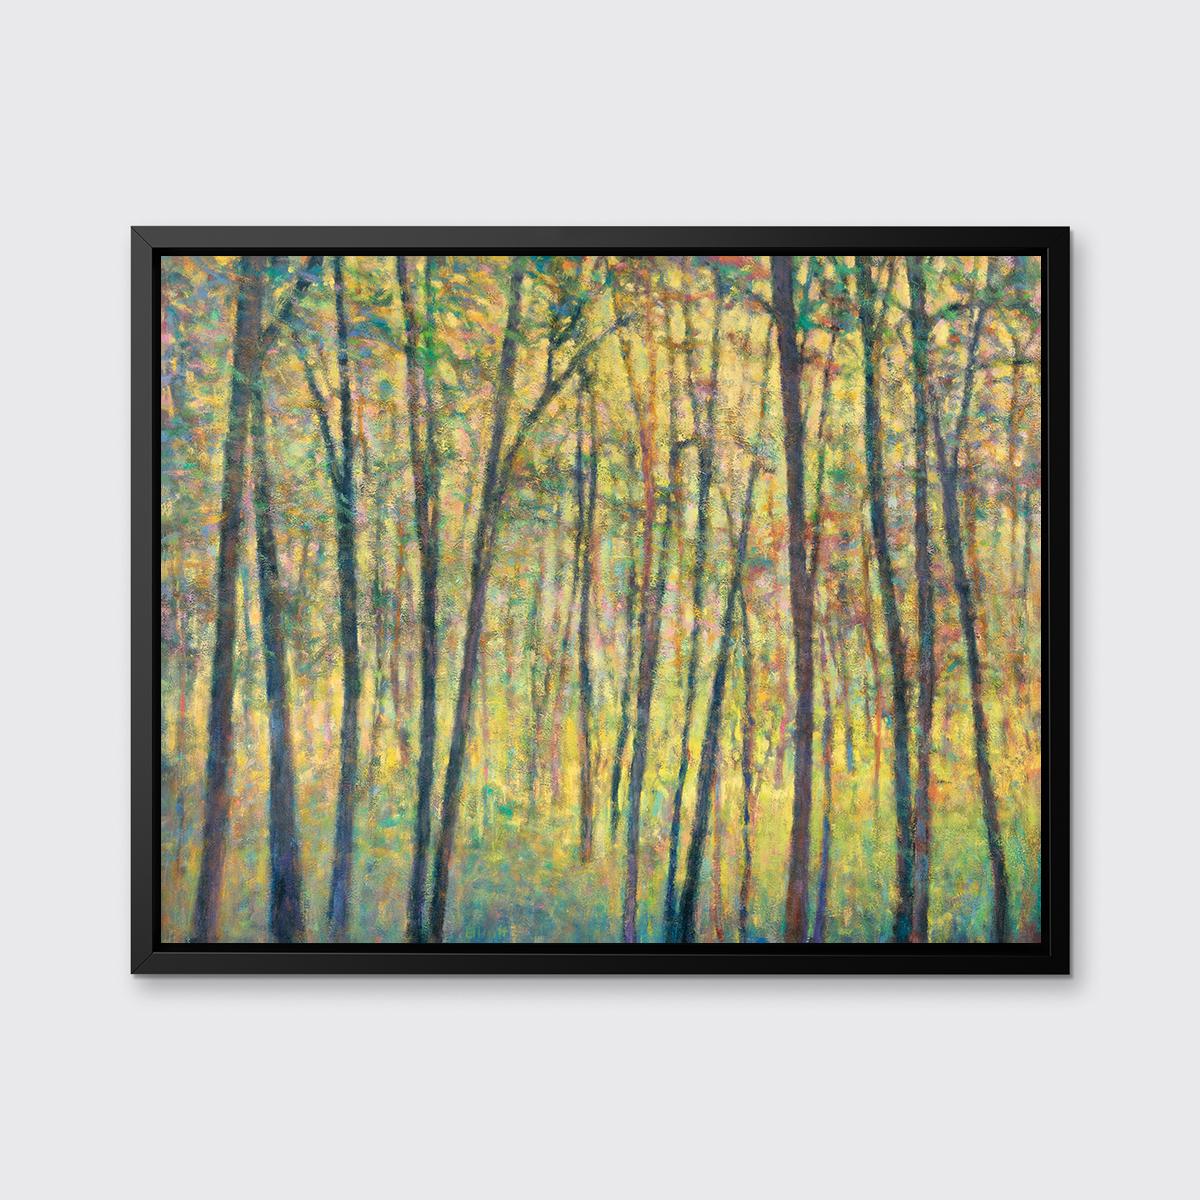 This abstract landscape limited edition print by Ken Elliott features a warm palette and impressionistic style. It pictures a forest-scape with thin, dark tree trunks, surrounded by bright yellow and warmer dabs of lavender, teal, and red. 

